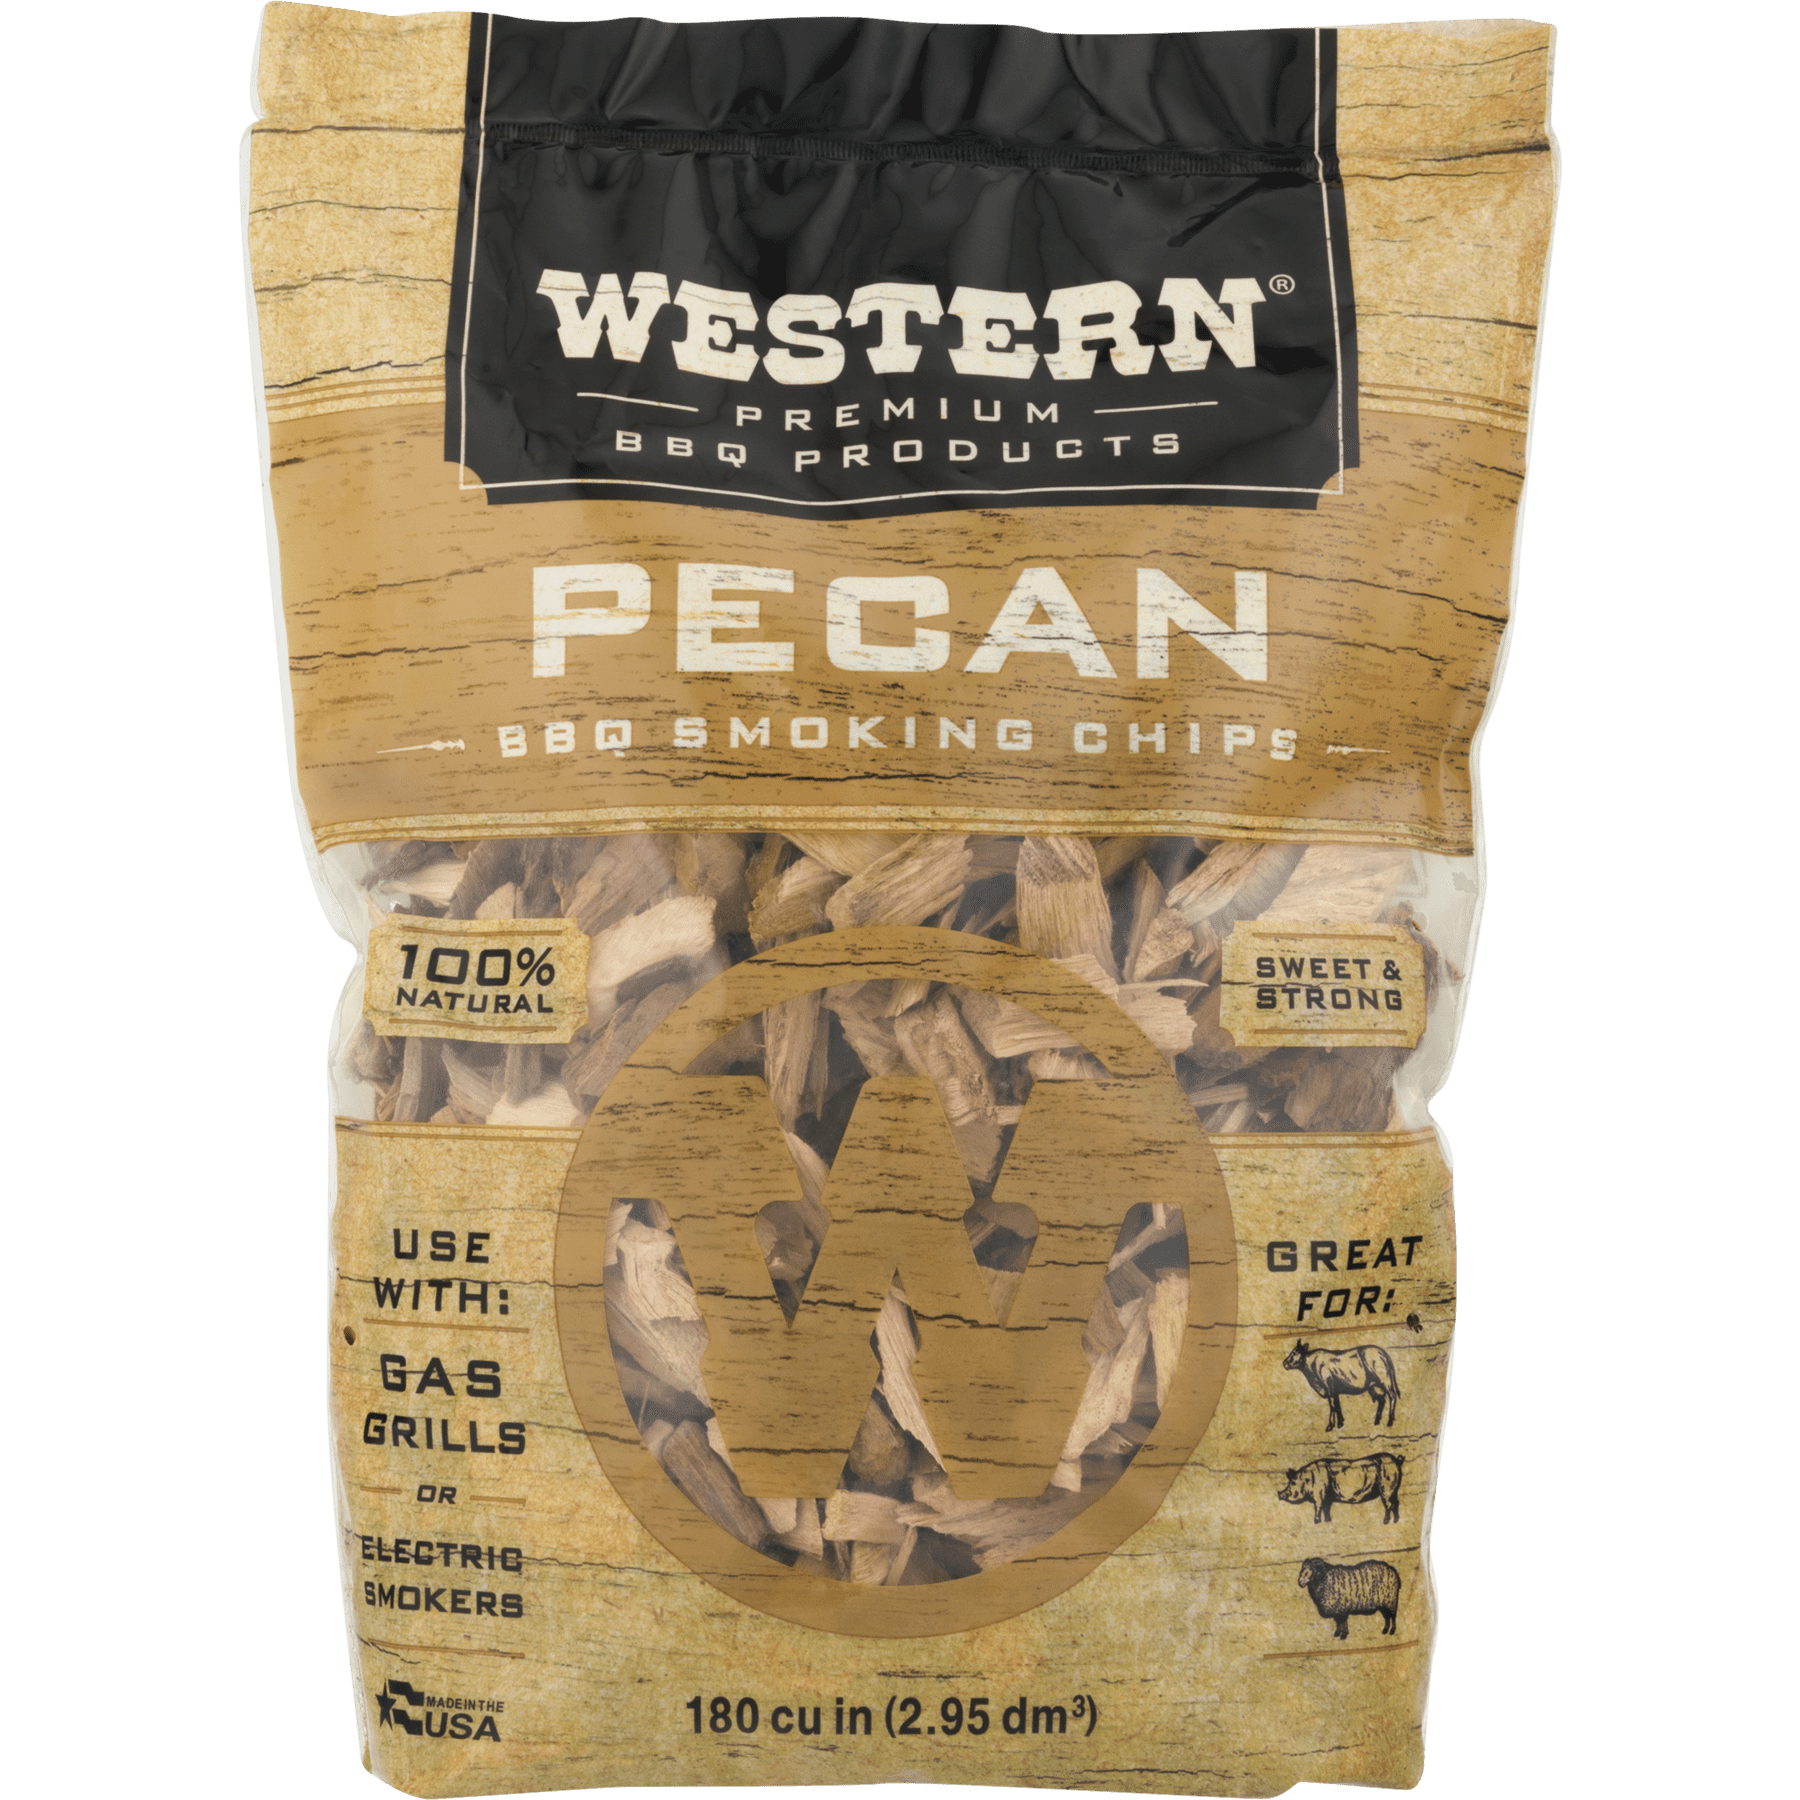 Texas Pecan Smoking Chips 4 cu in Labor Day Special Lbs Box of Dried Wood 500 